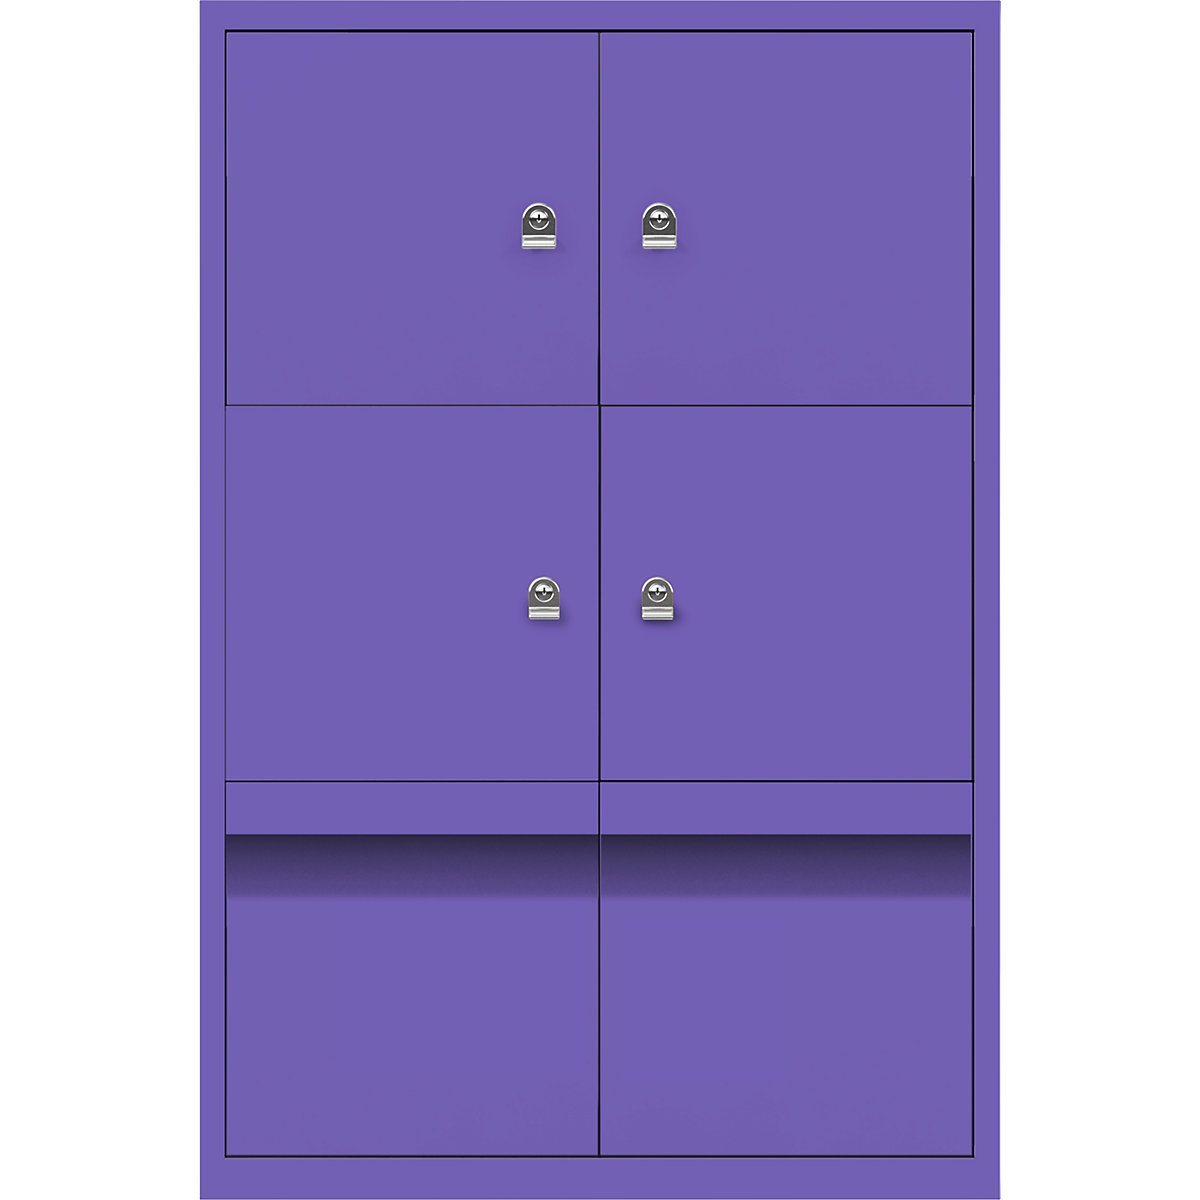 LateralFile™ lodge – BISLEY, with 4 lockable compartments and 2 drawers, height 375 mm each, parma-23